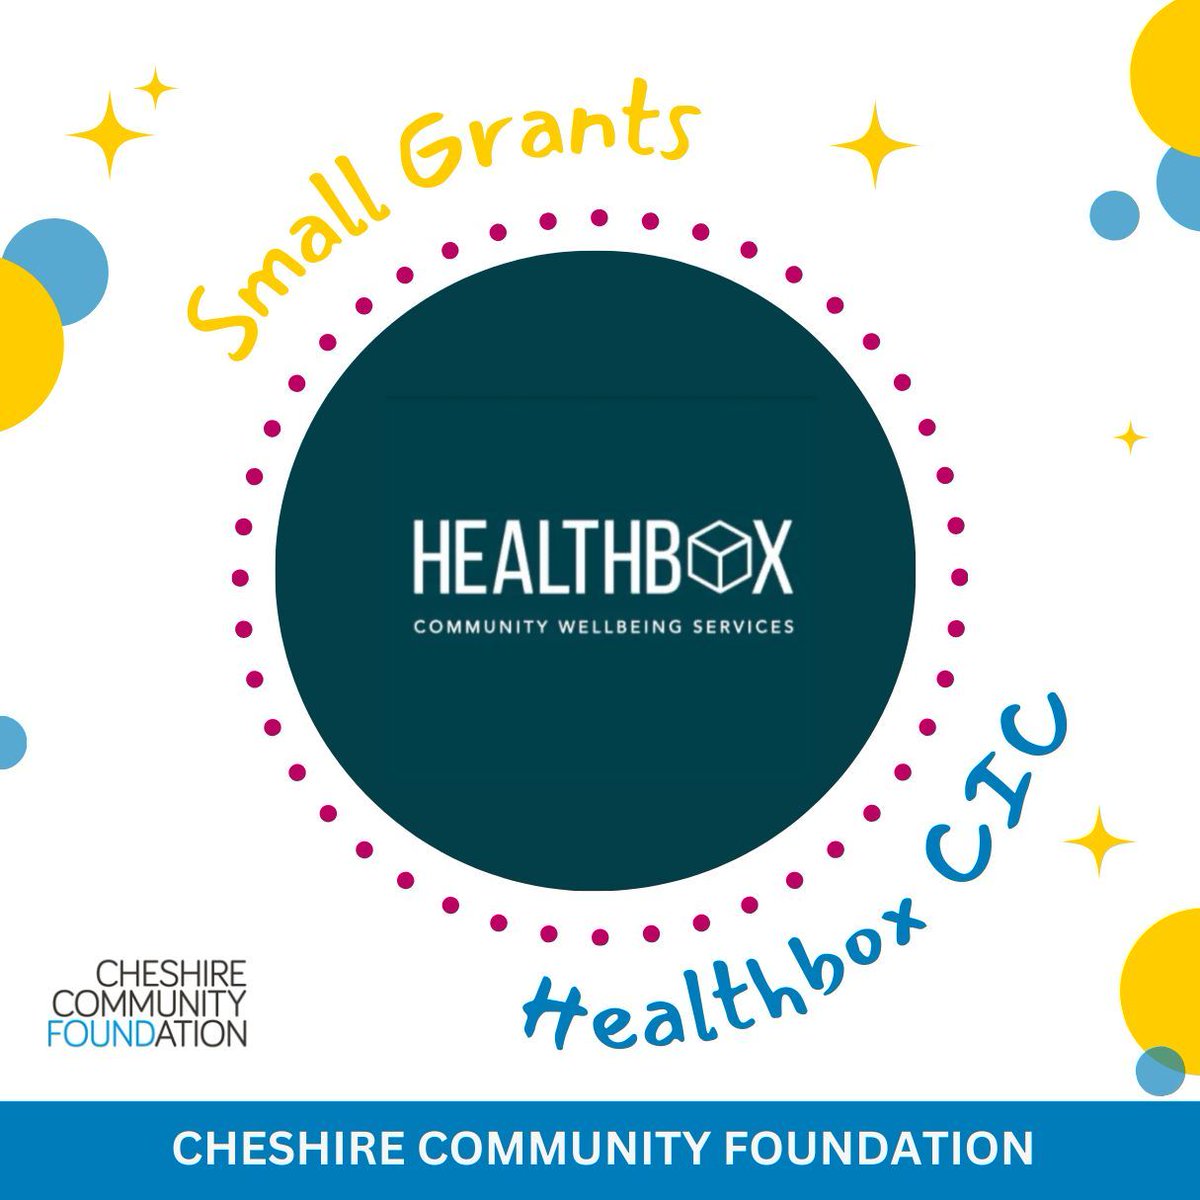 Harmony Wheels is a @healthboxcic project funded by one of our small grants. It aims to reduce isolation and loneliness in the elderly population, bringing them a sense of purpose and belonging through shared musical experiences. #Cheshire